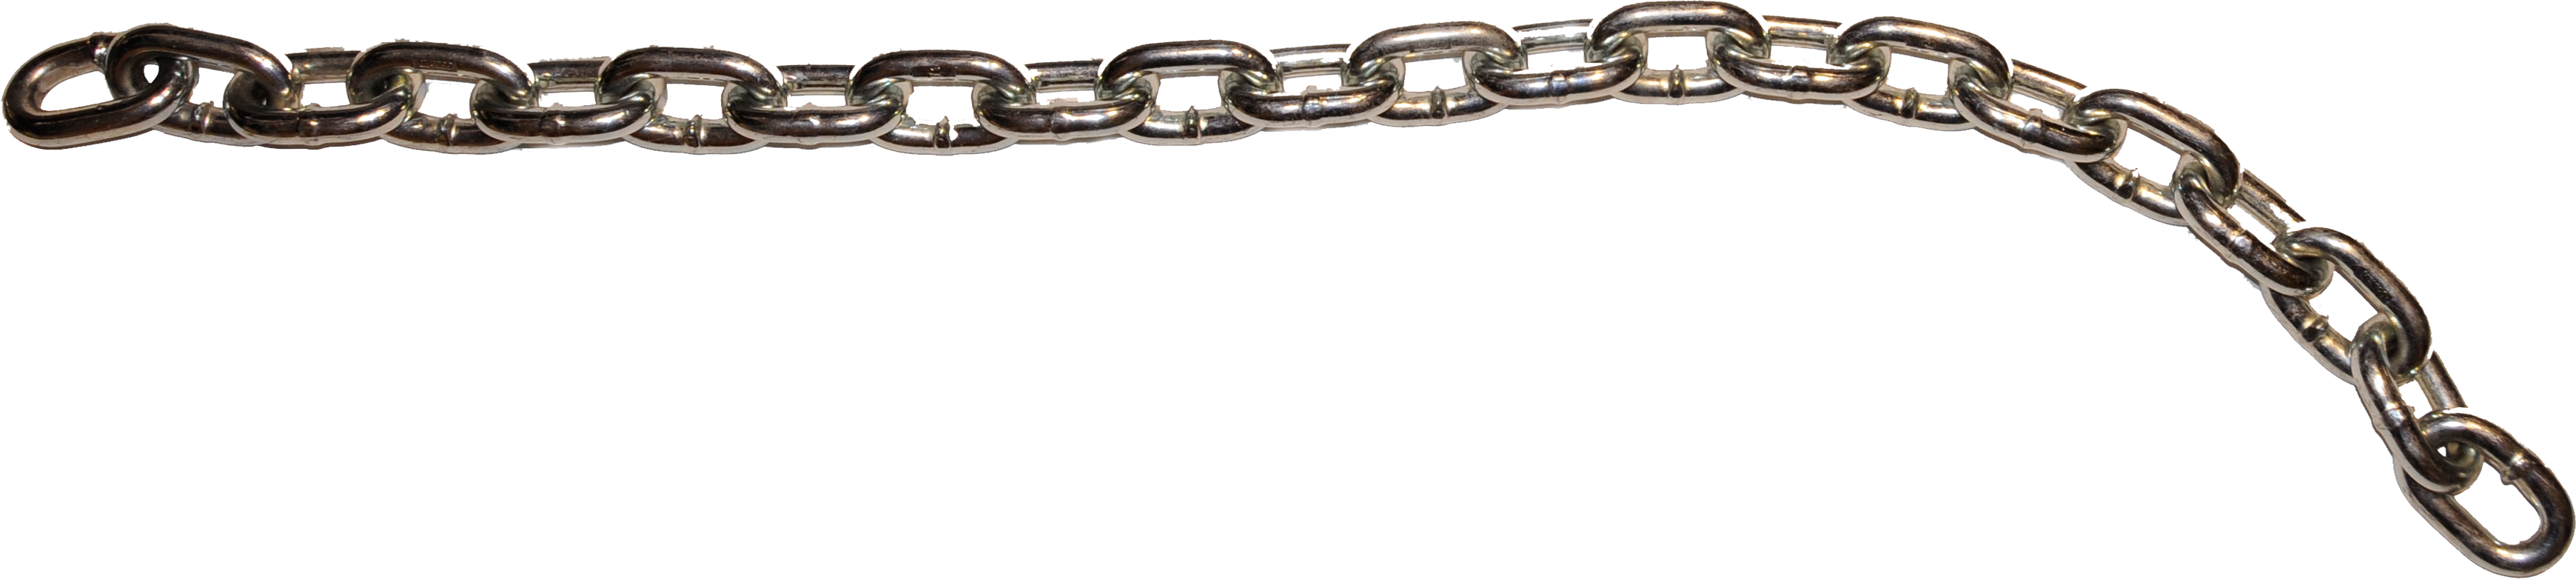 Png images gallery free. Chain clipart iron chain